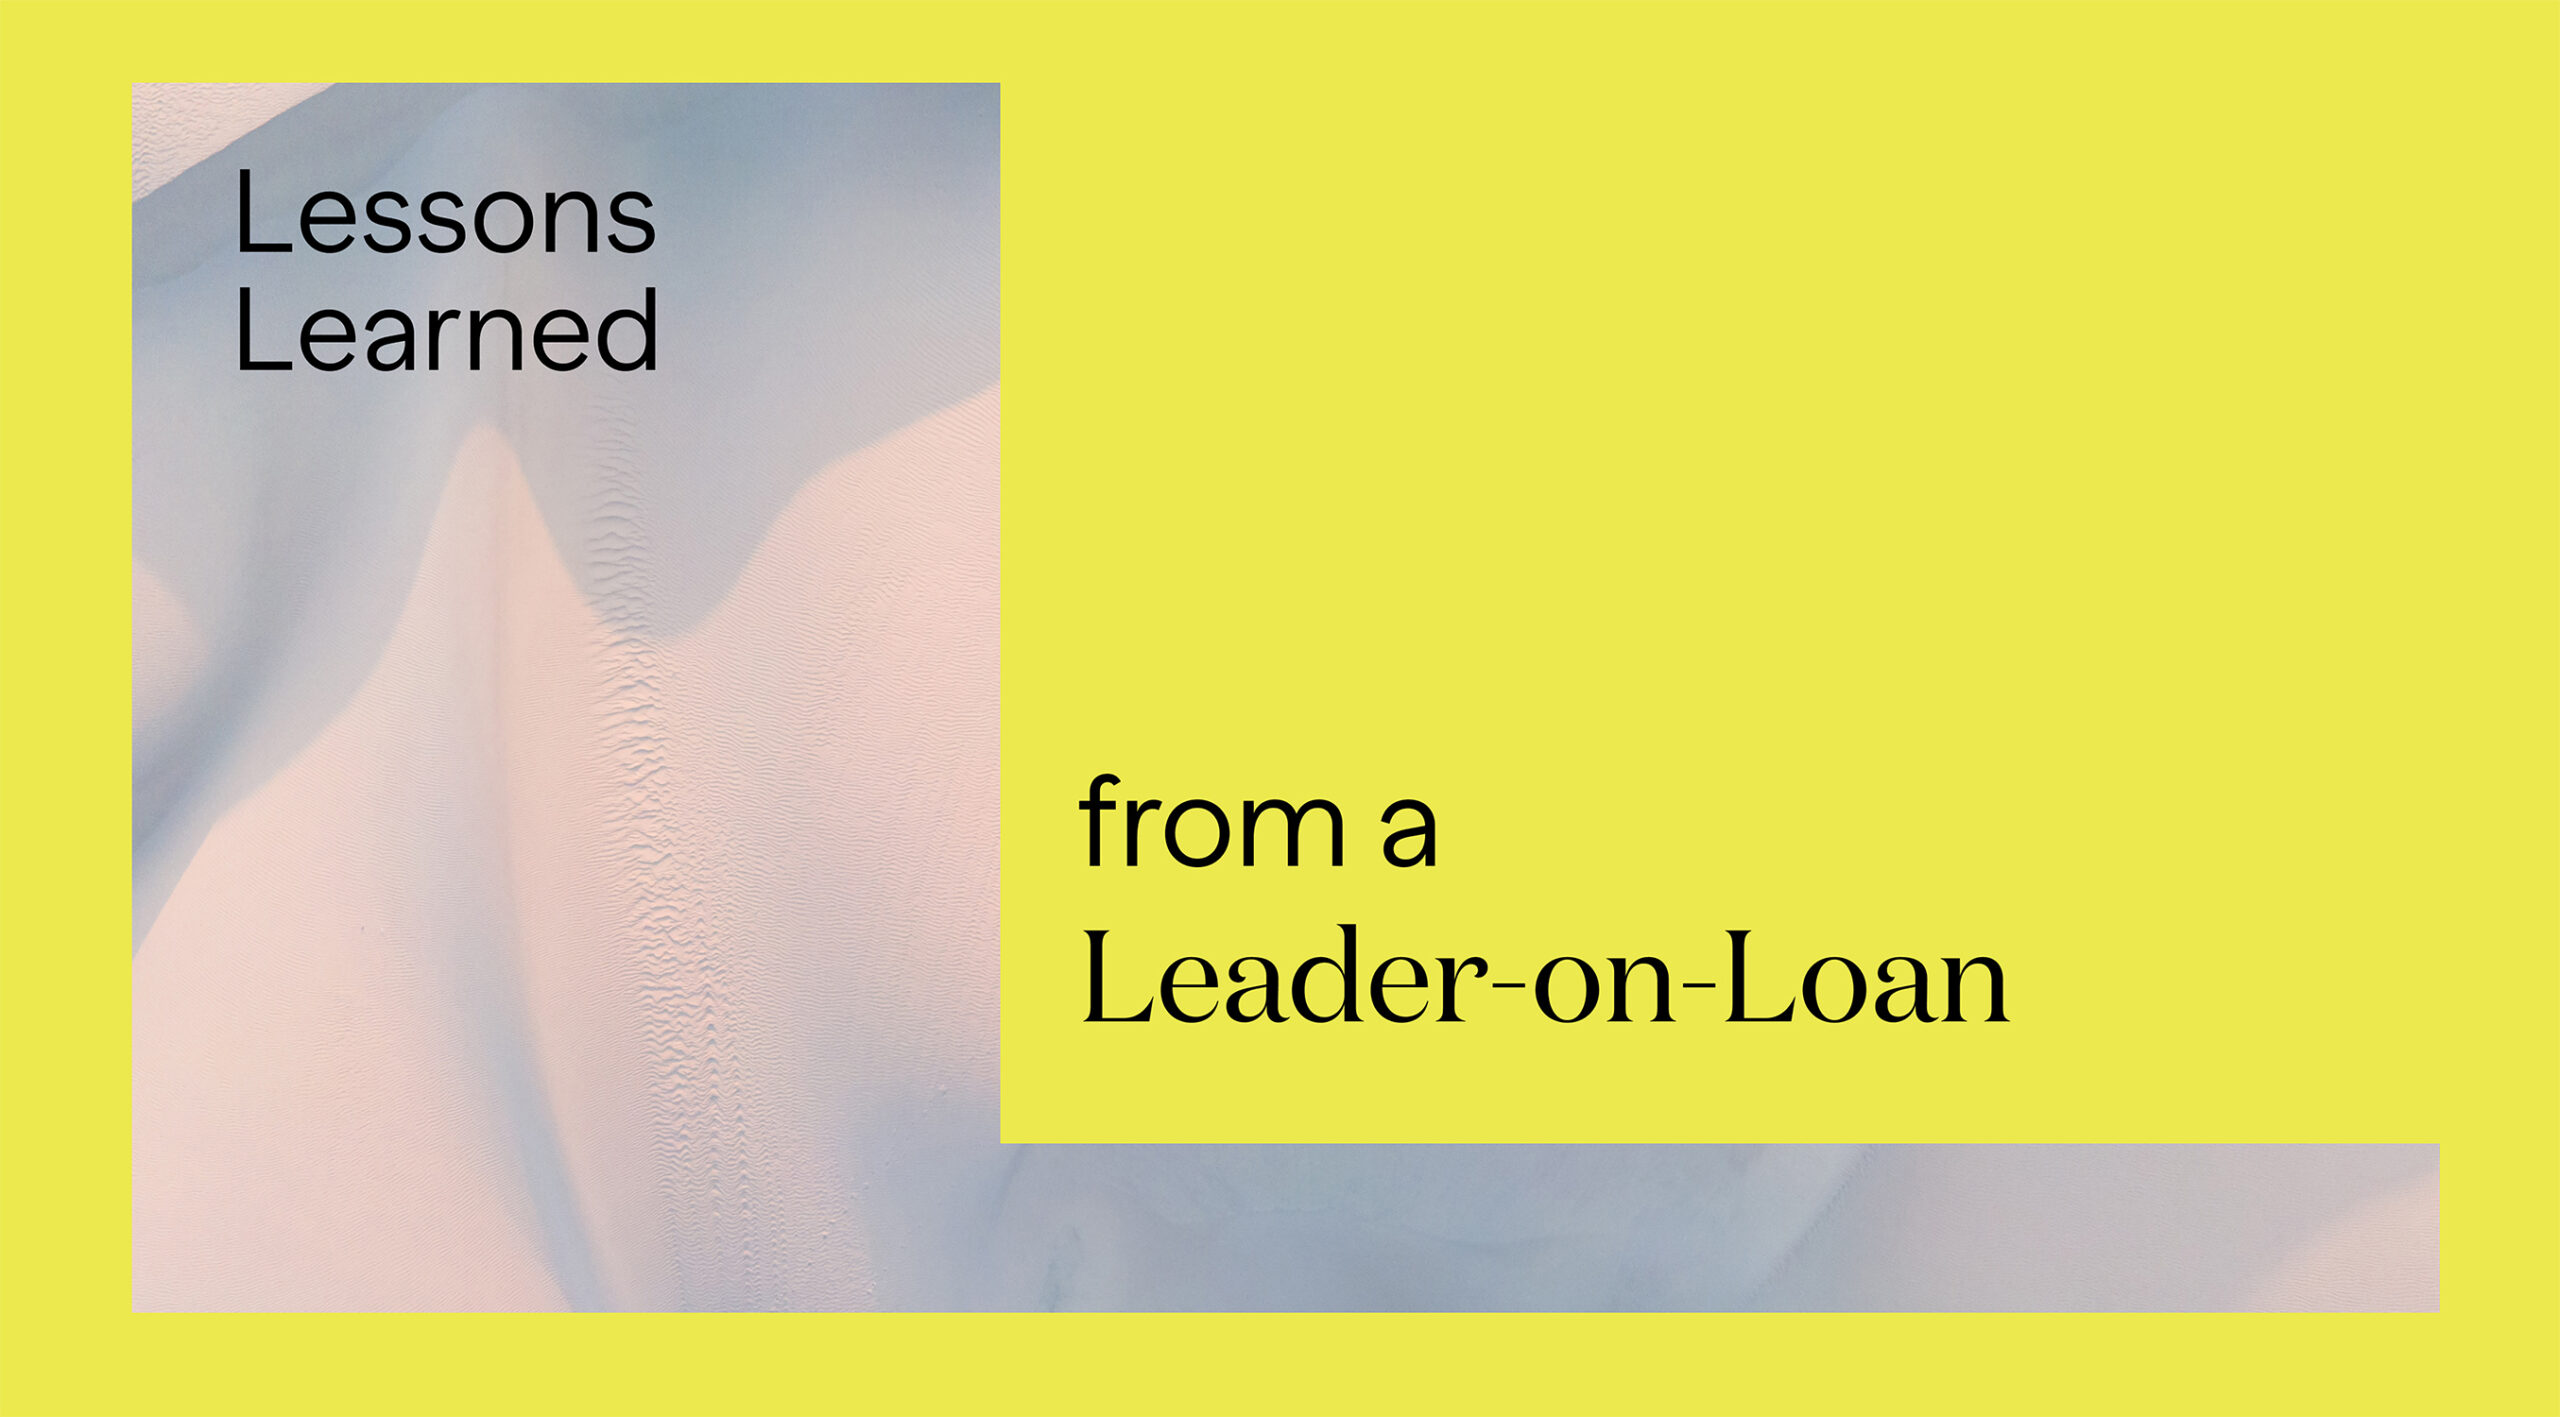 Lessons Learned from a Leader-on-Loan